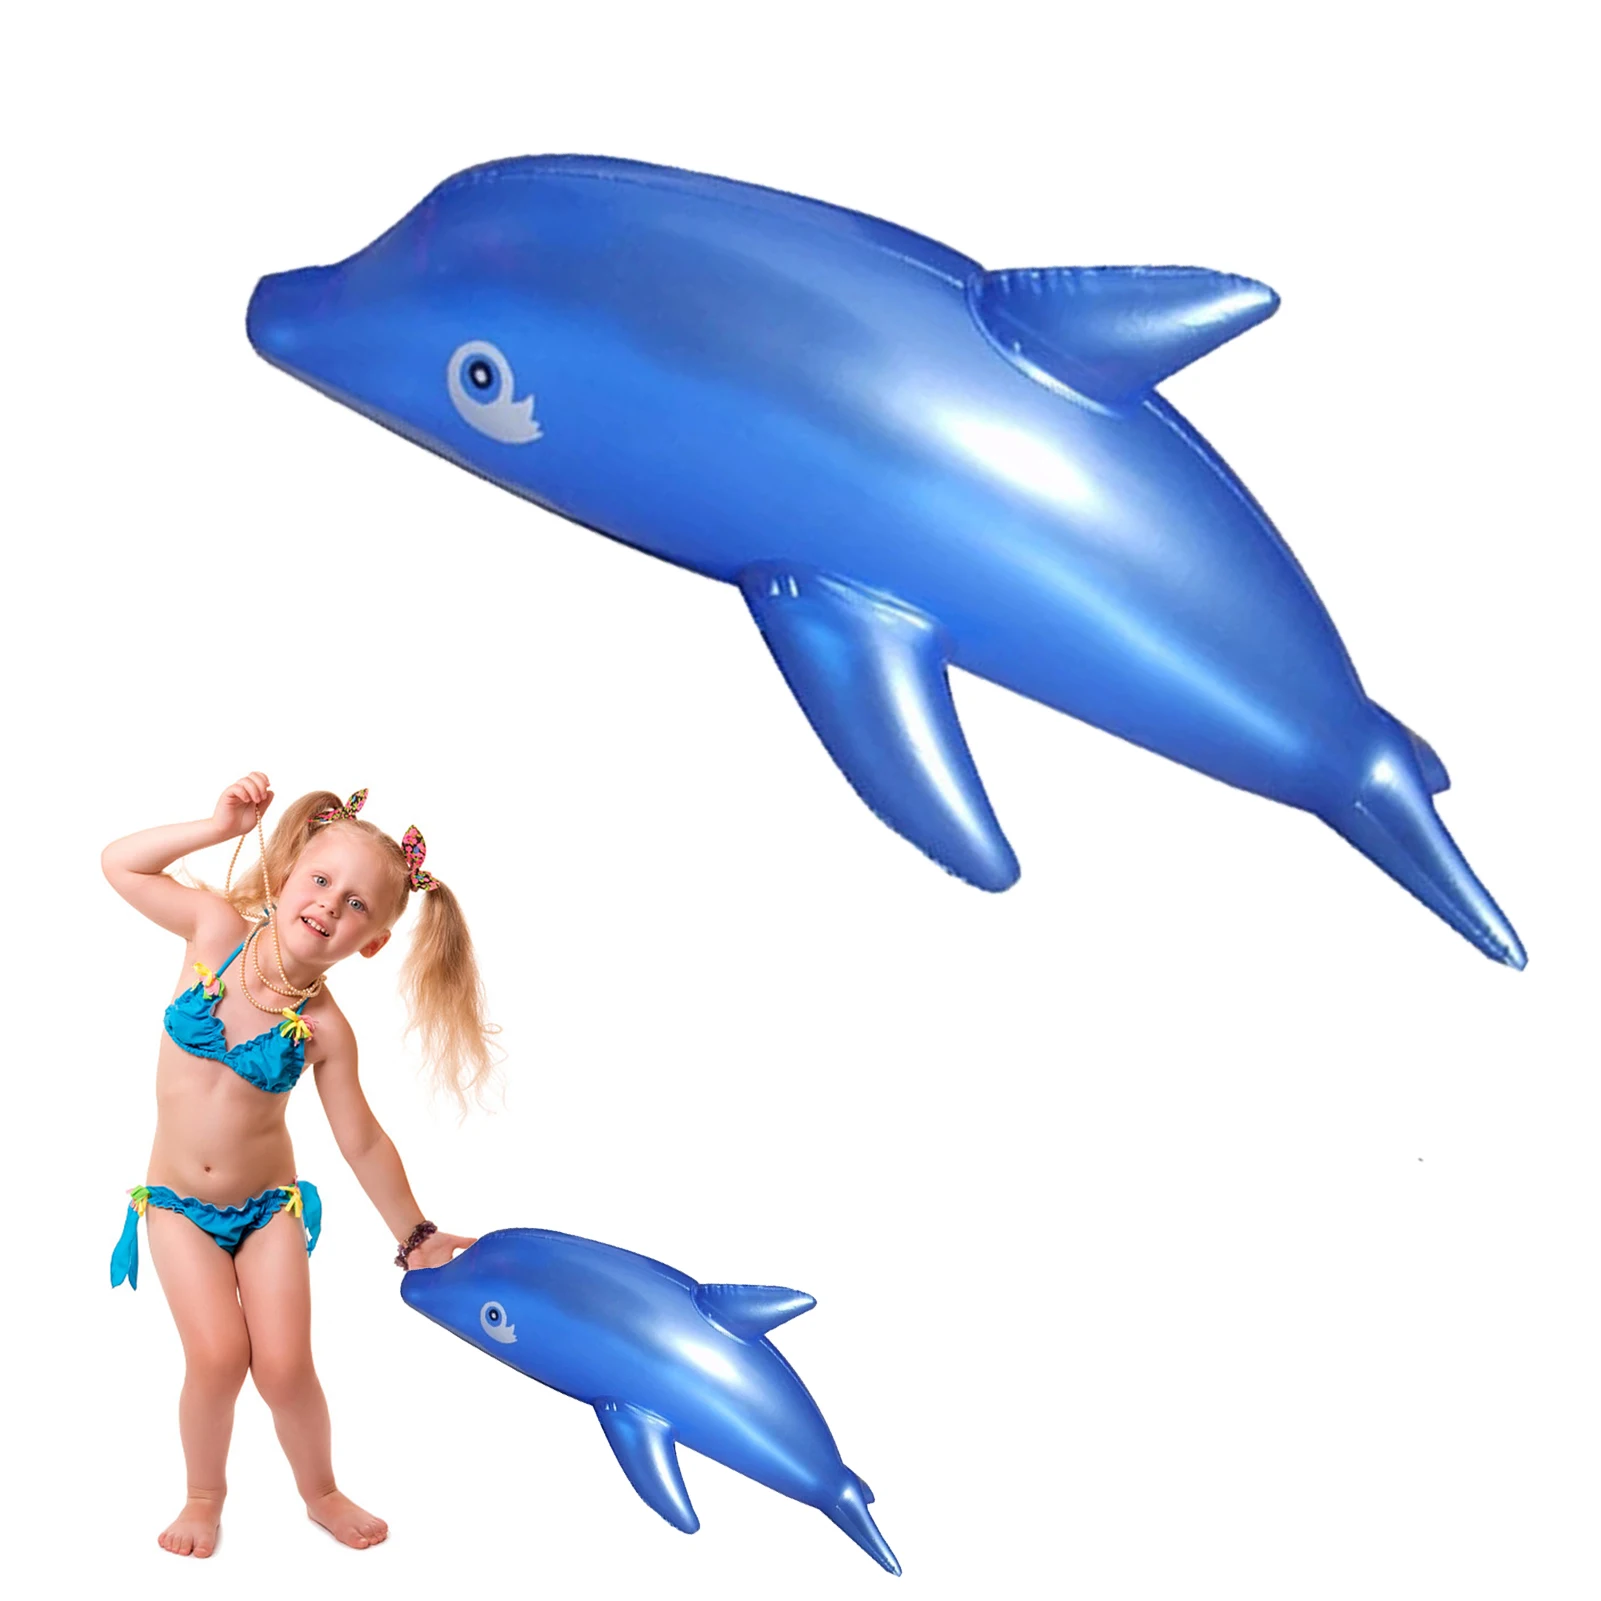 

Dolphin Inflatable Toy 53cm Inflatable Floating Swimming Pool Dolphin Toys Inflate Pool Beach Birthday Party Decoration Perfect